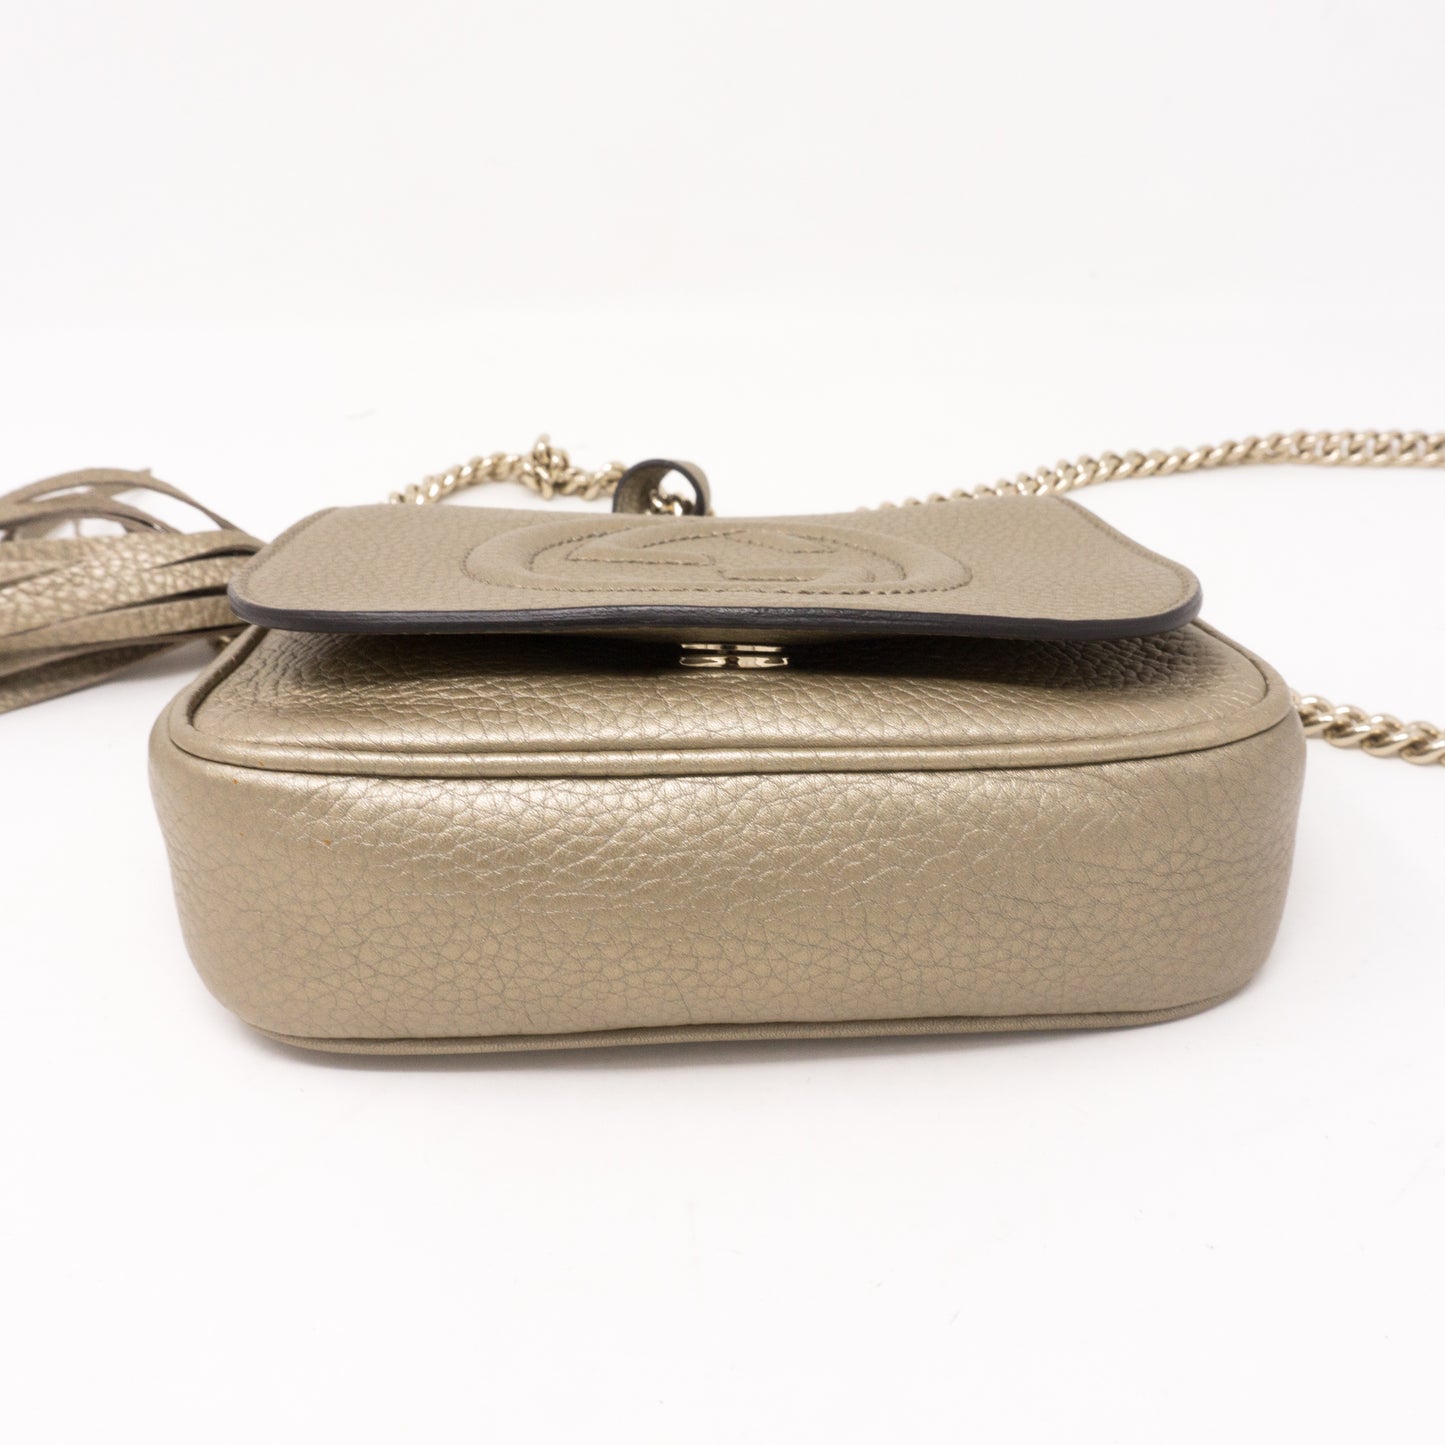 Soho Small Chain Bag Champagne Leather